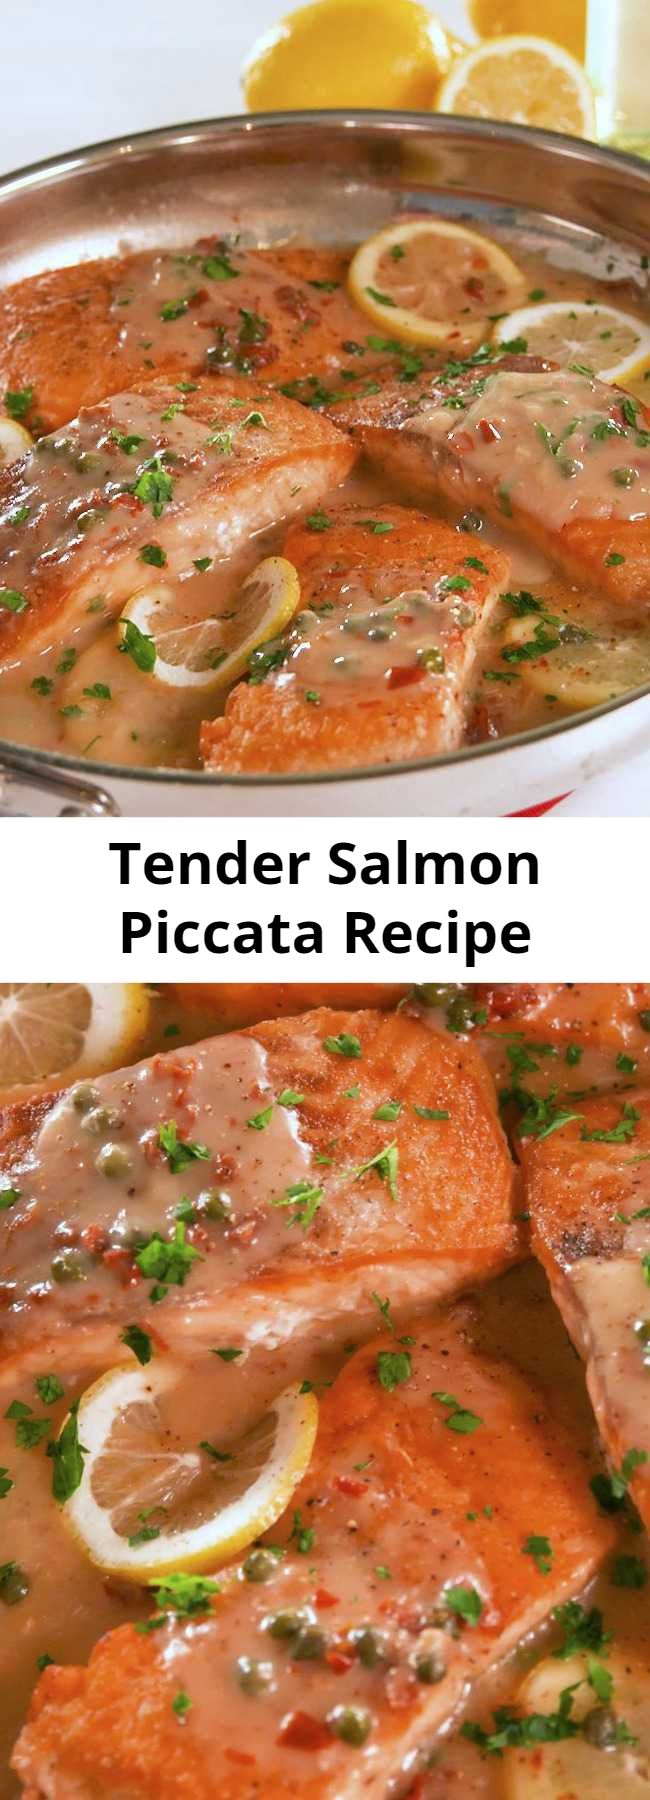 Tender Salmon Piccata Recipe - Tender lemony salmon piccata is ready in 30 min. Get started on that Mediterranean diet with this recipe. Fish are friends AND food. #easyrecipe #salmon #seafood #dinner #fish